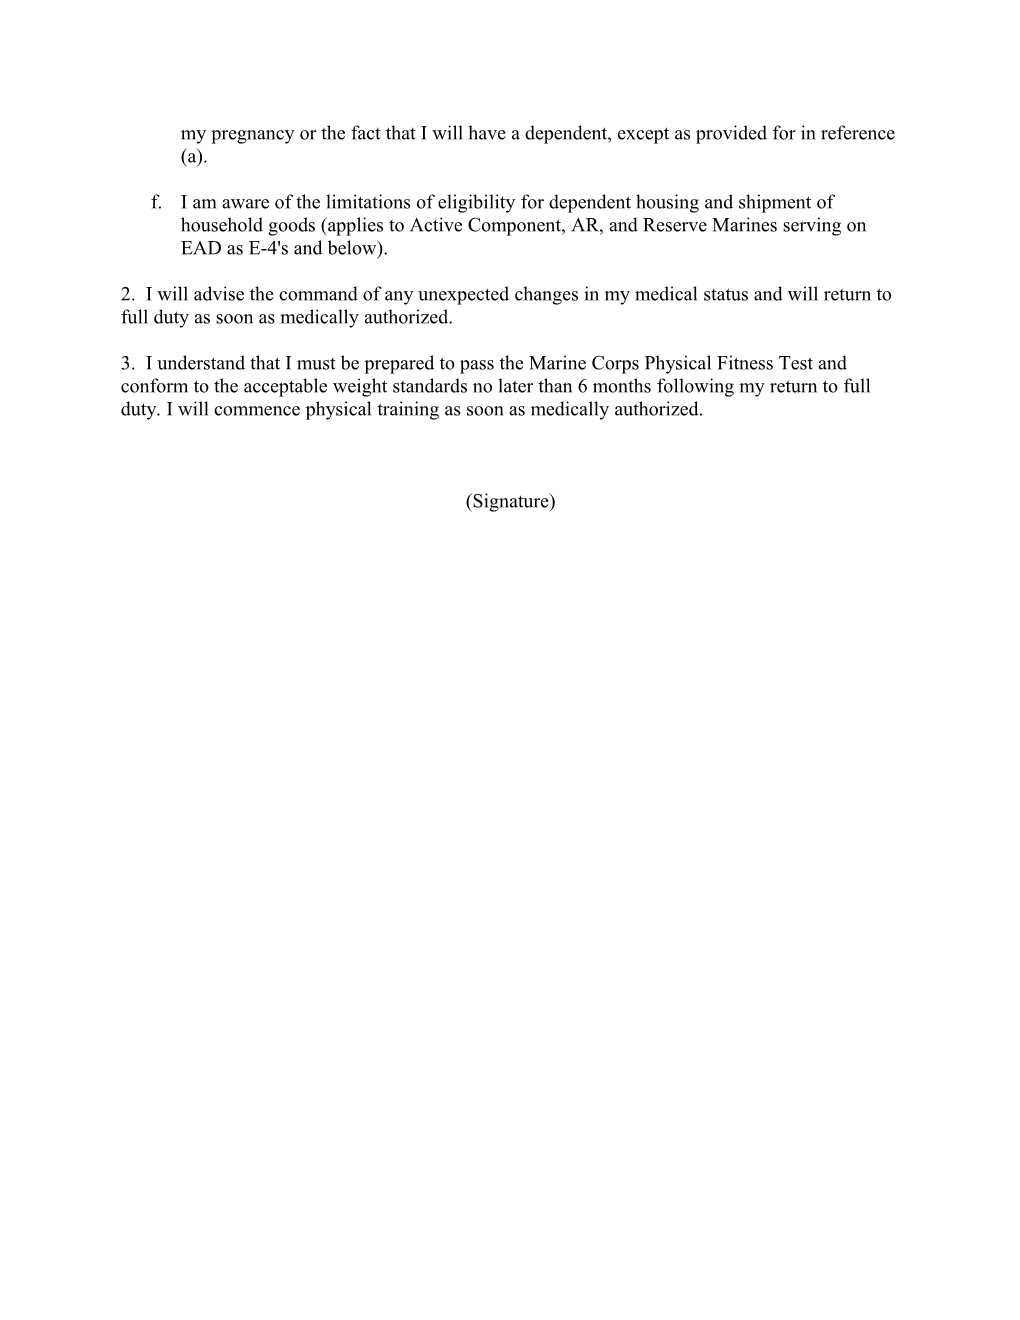 Format for Notification of Commanding Officer